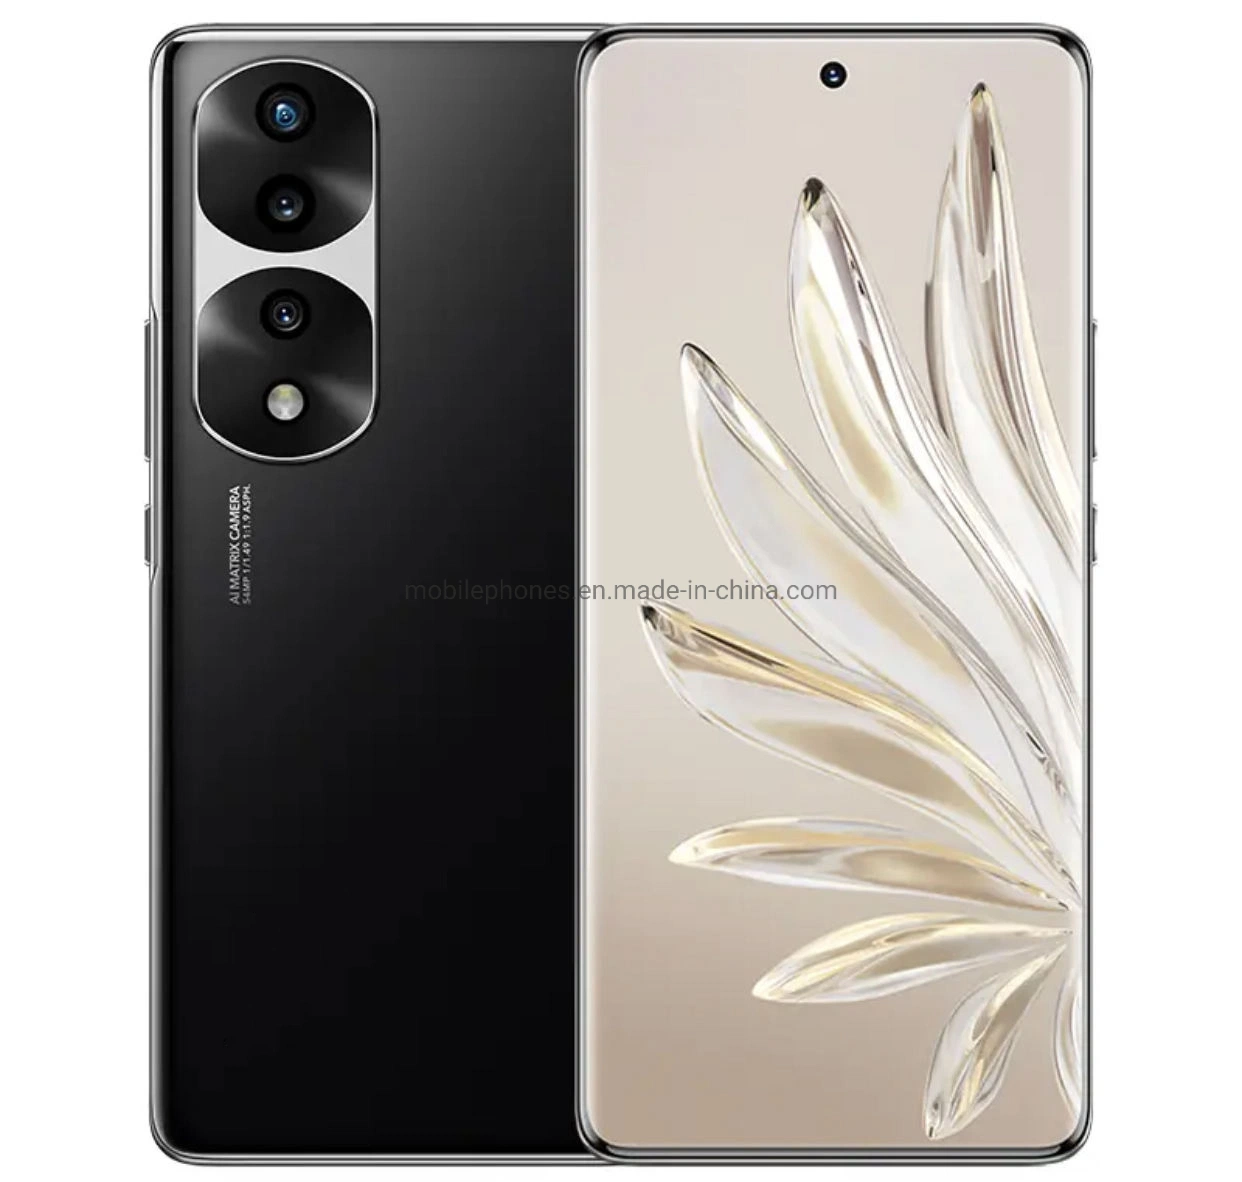 New Honfor 70 PRO 5g Smartphone Android 12 Dimensity 8000 6.78" 120Hz 54MP Three Rear Cameras 4500mAh 100W NFC